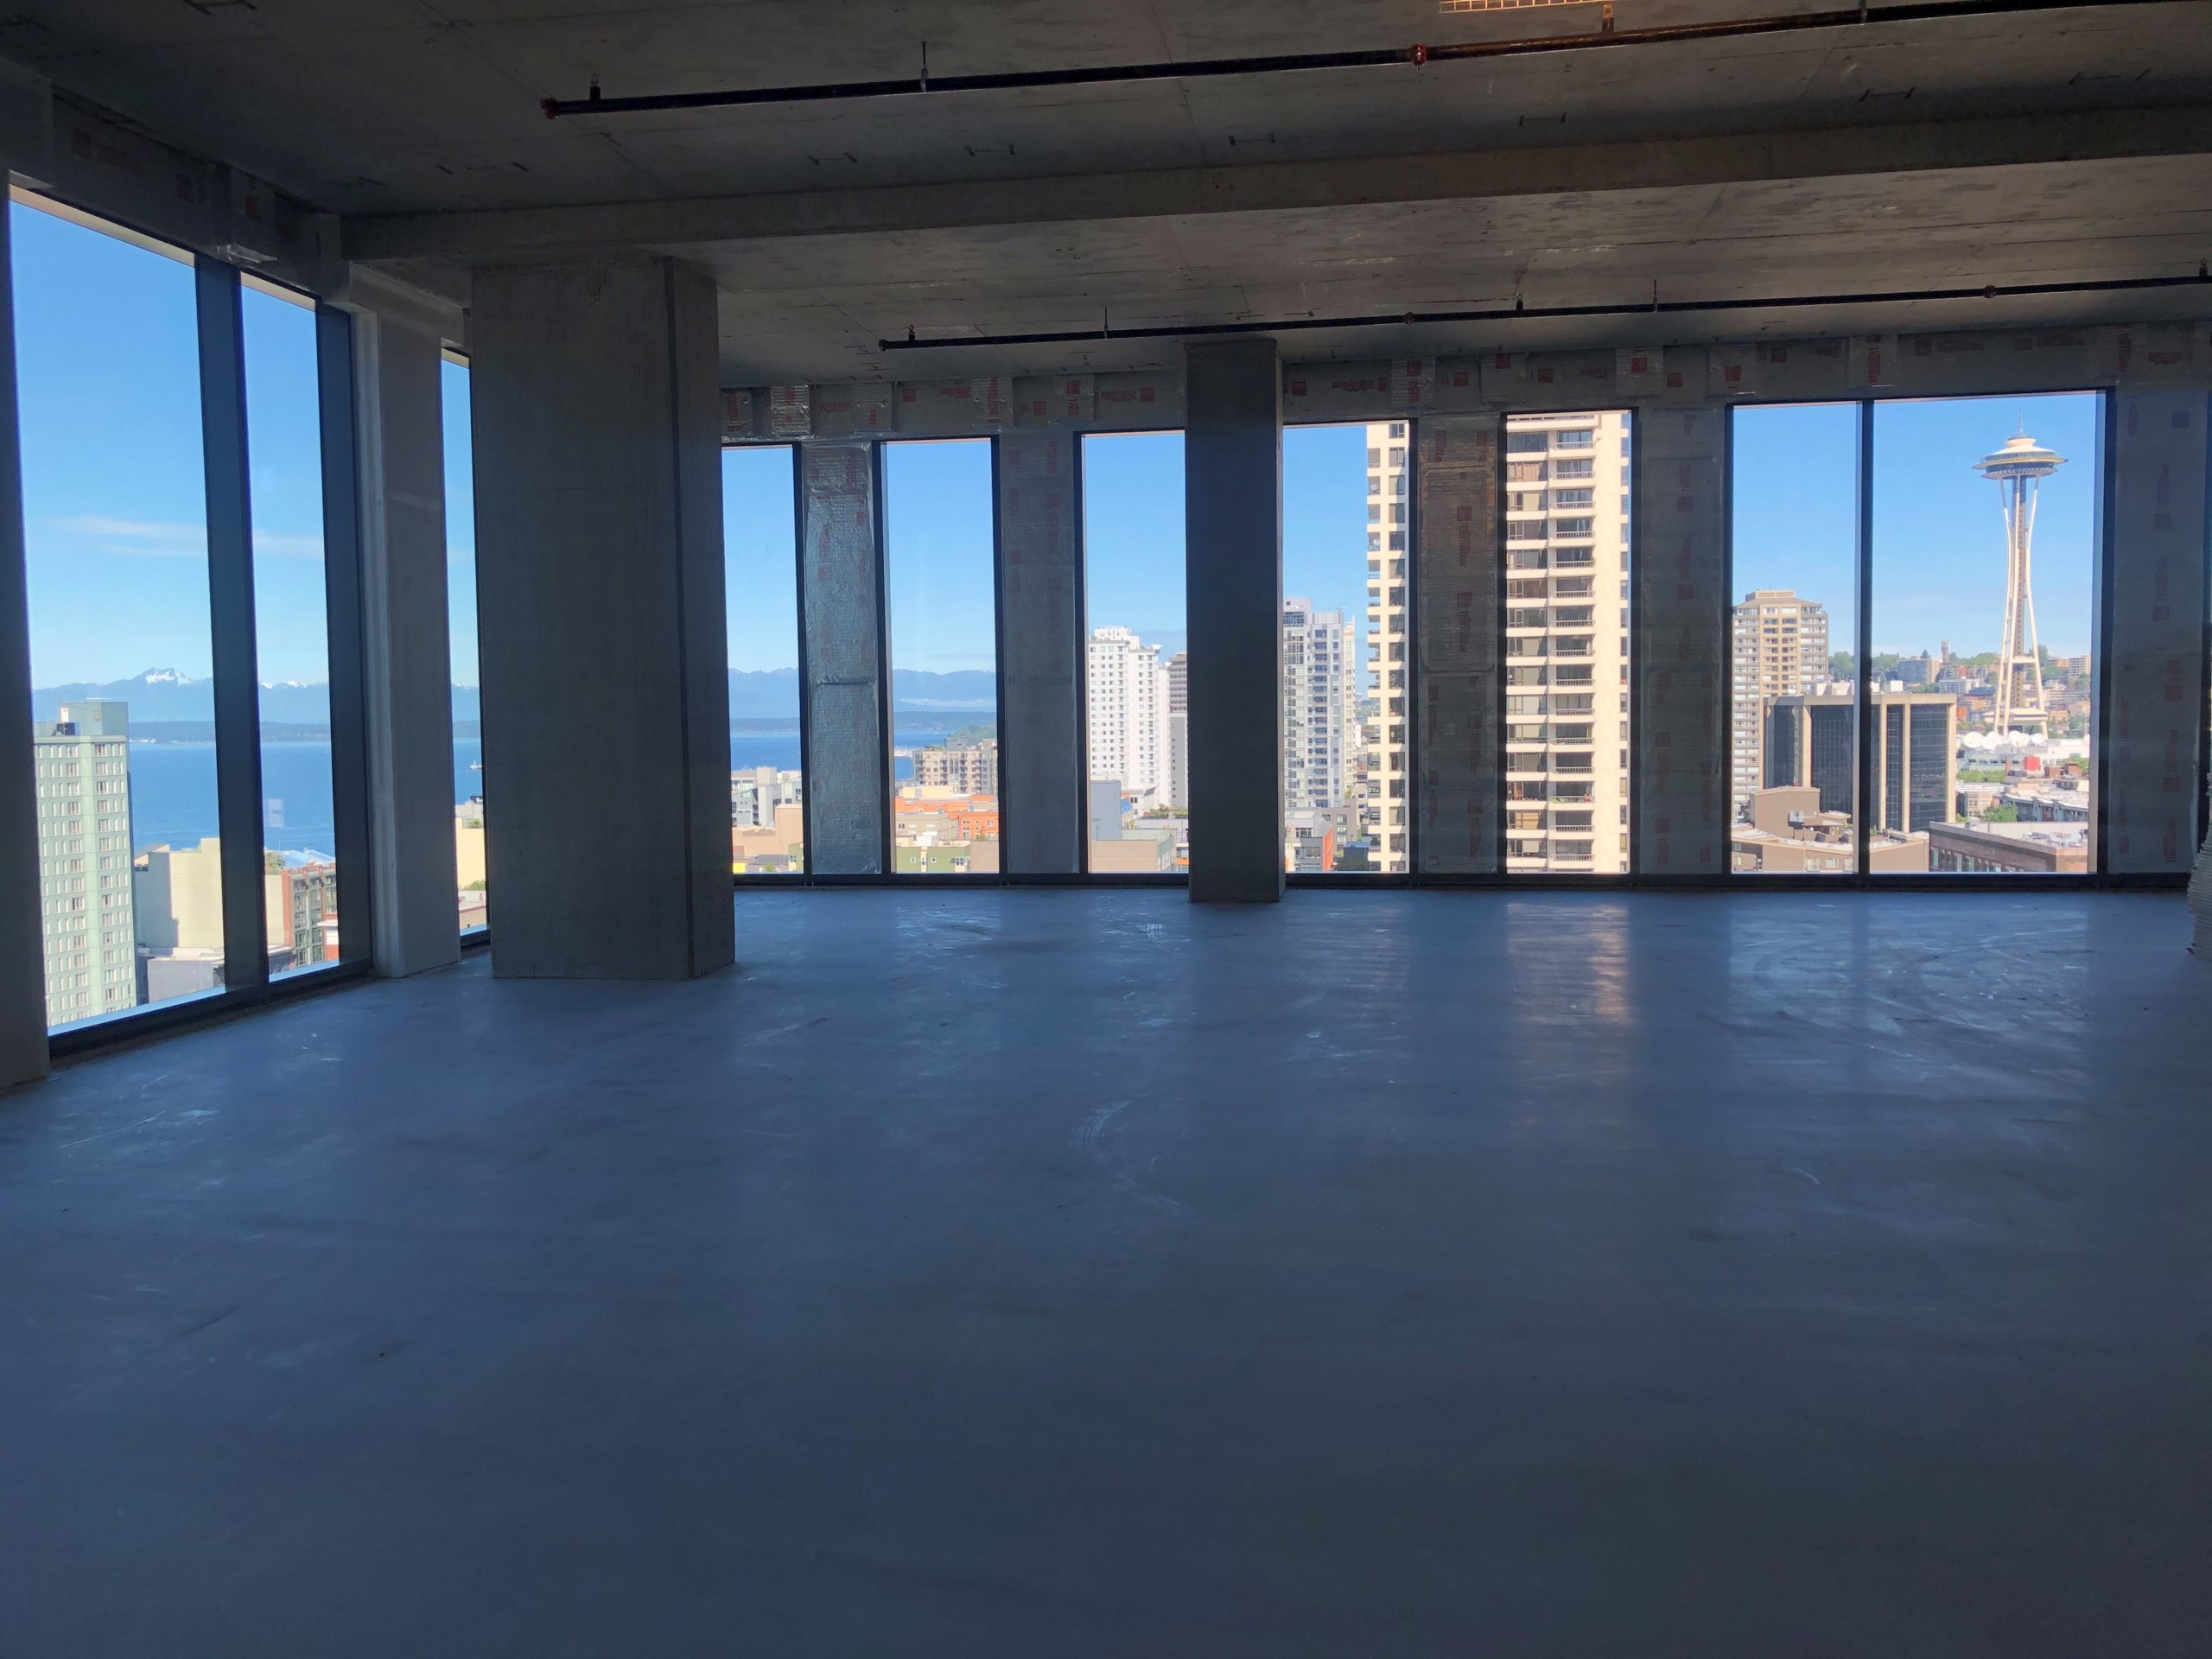 Floor 10 A of Third and Lenora. Floors 9–11 are connected through a interstitial stairwell, perfect for a single tenant.